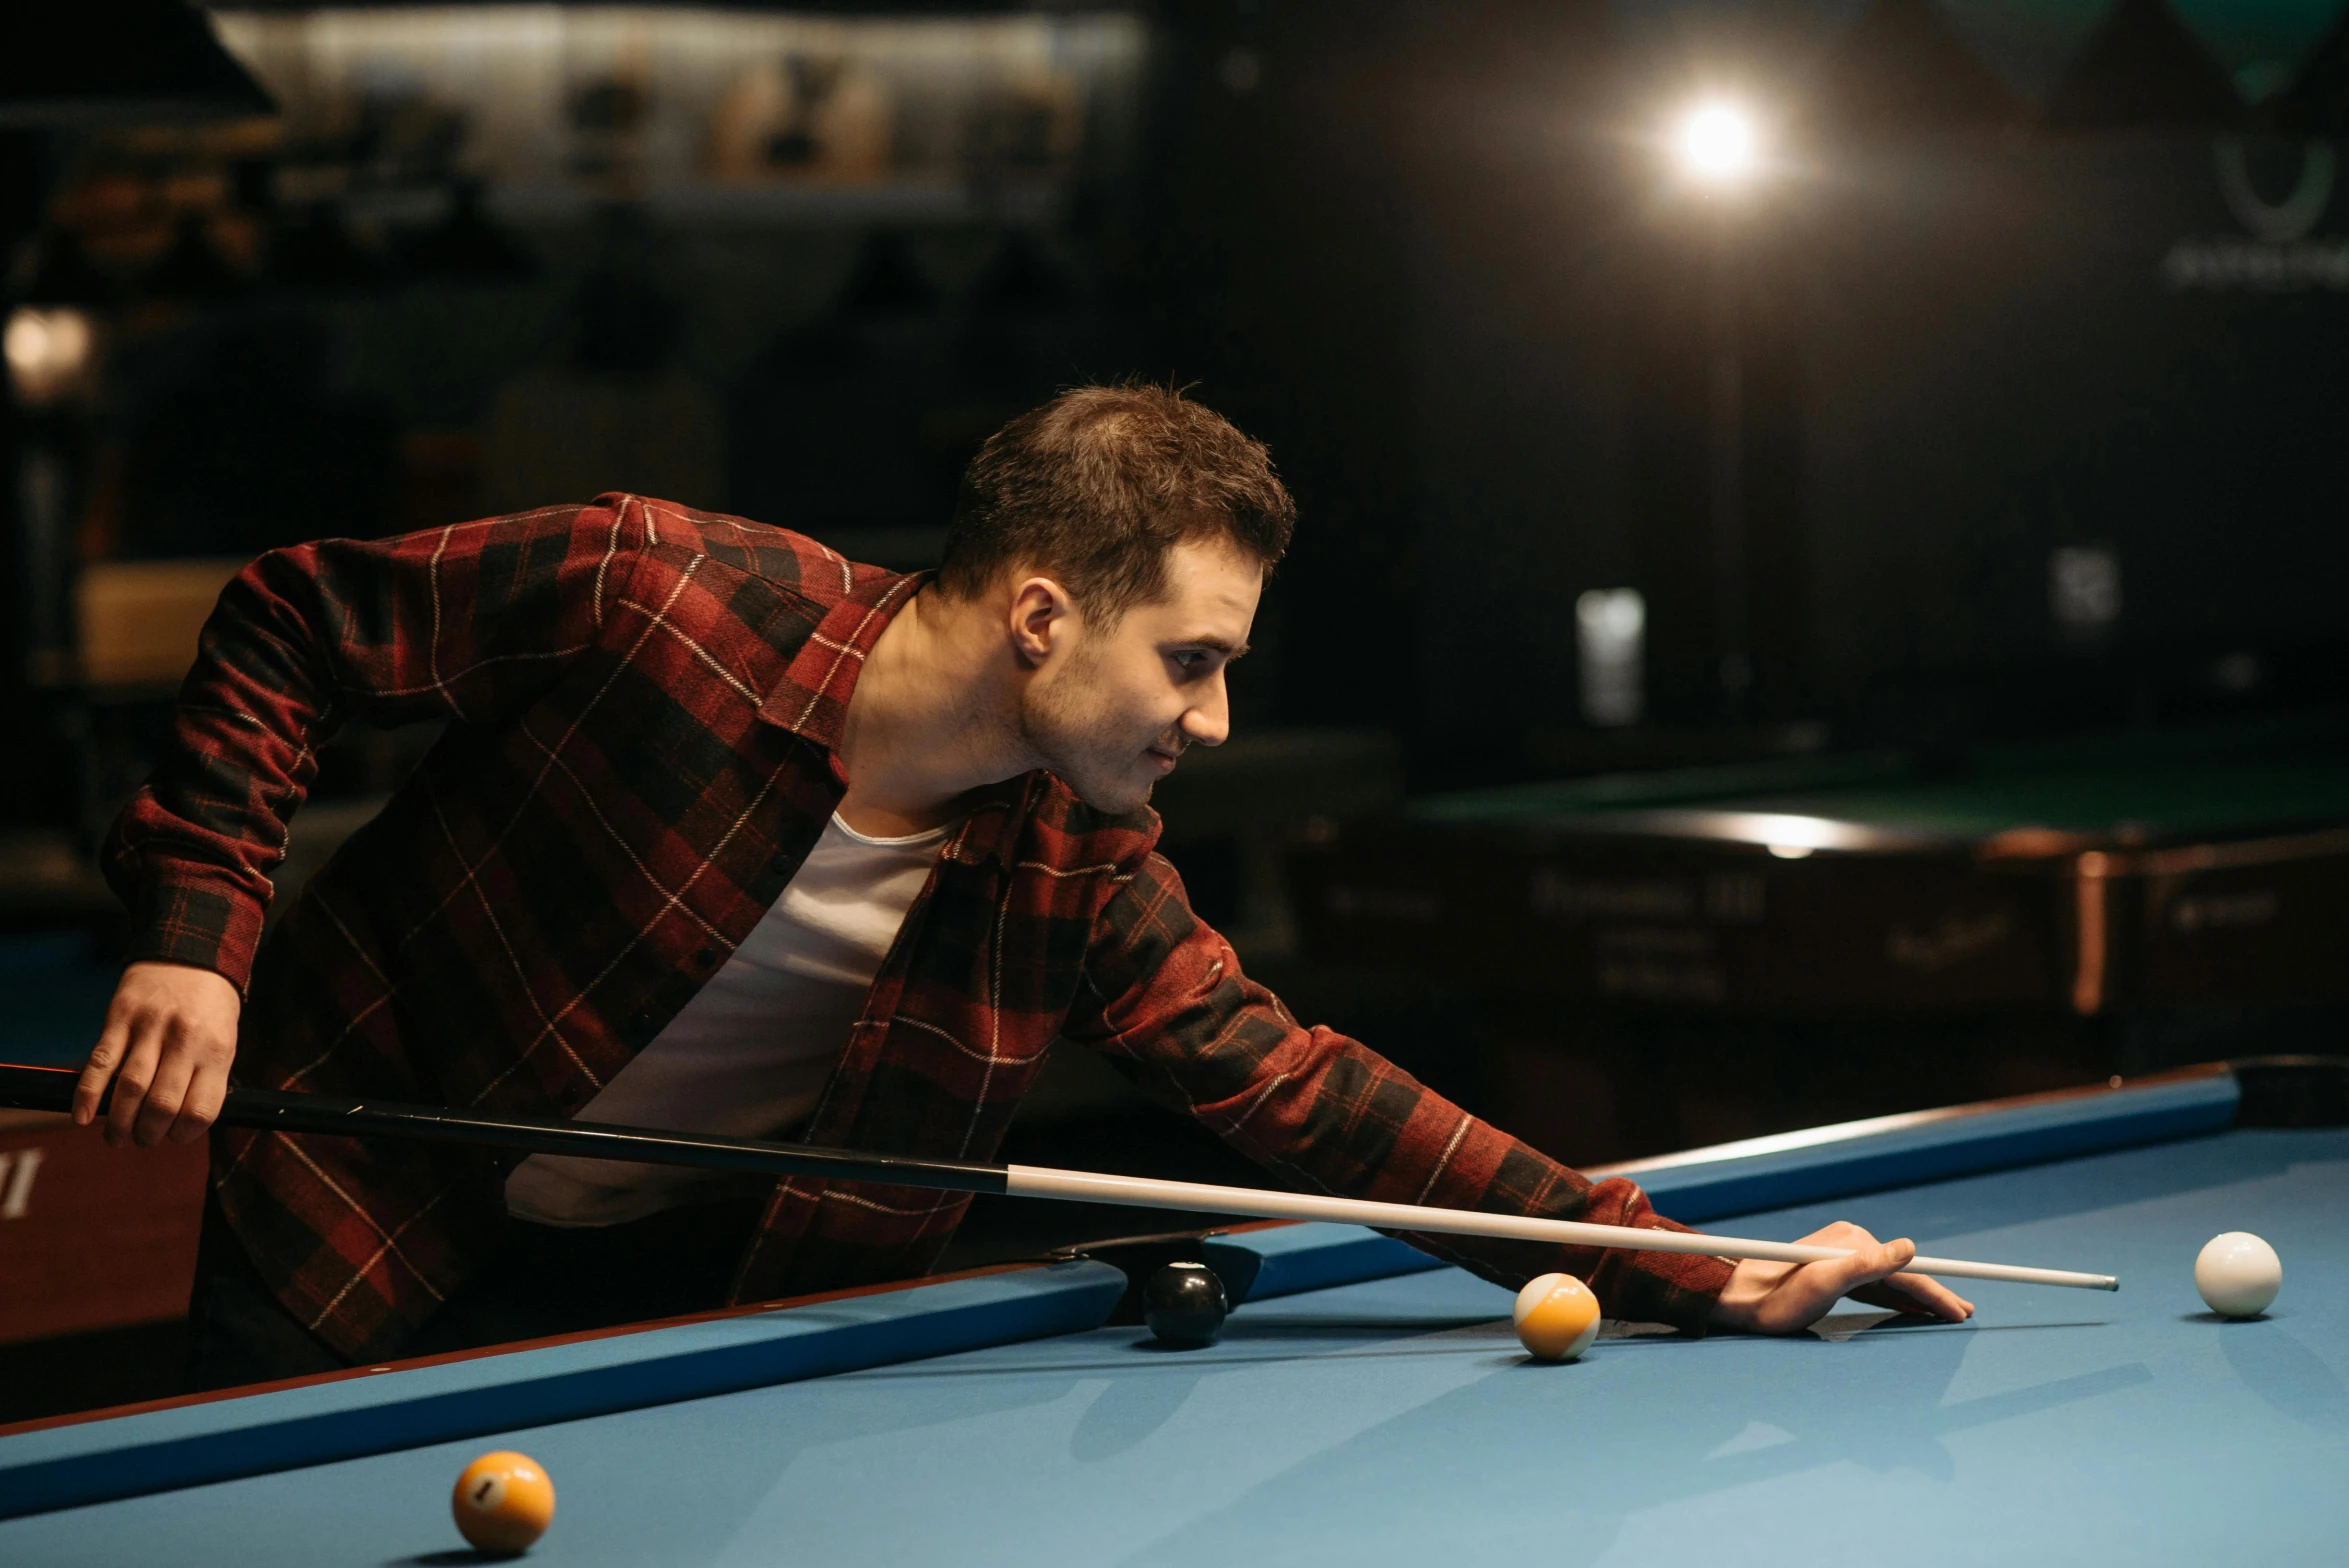 a man leaning over a pool table with a cue, pexels contest winner, profile pic, in an arena pit, thumbnail, brown